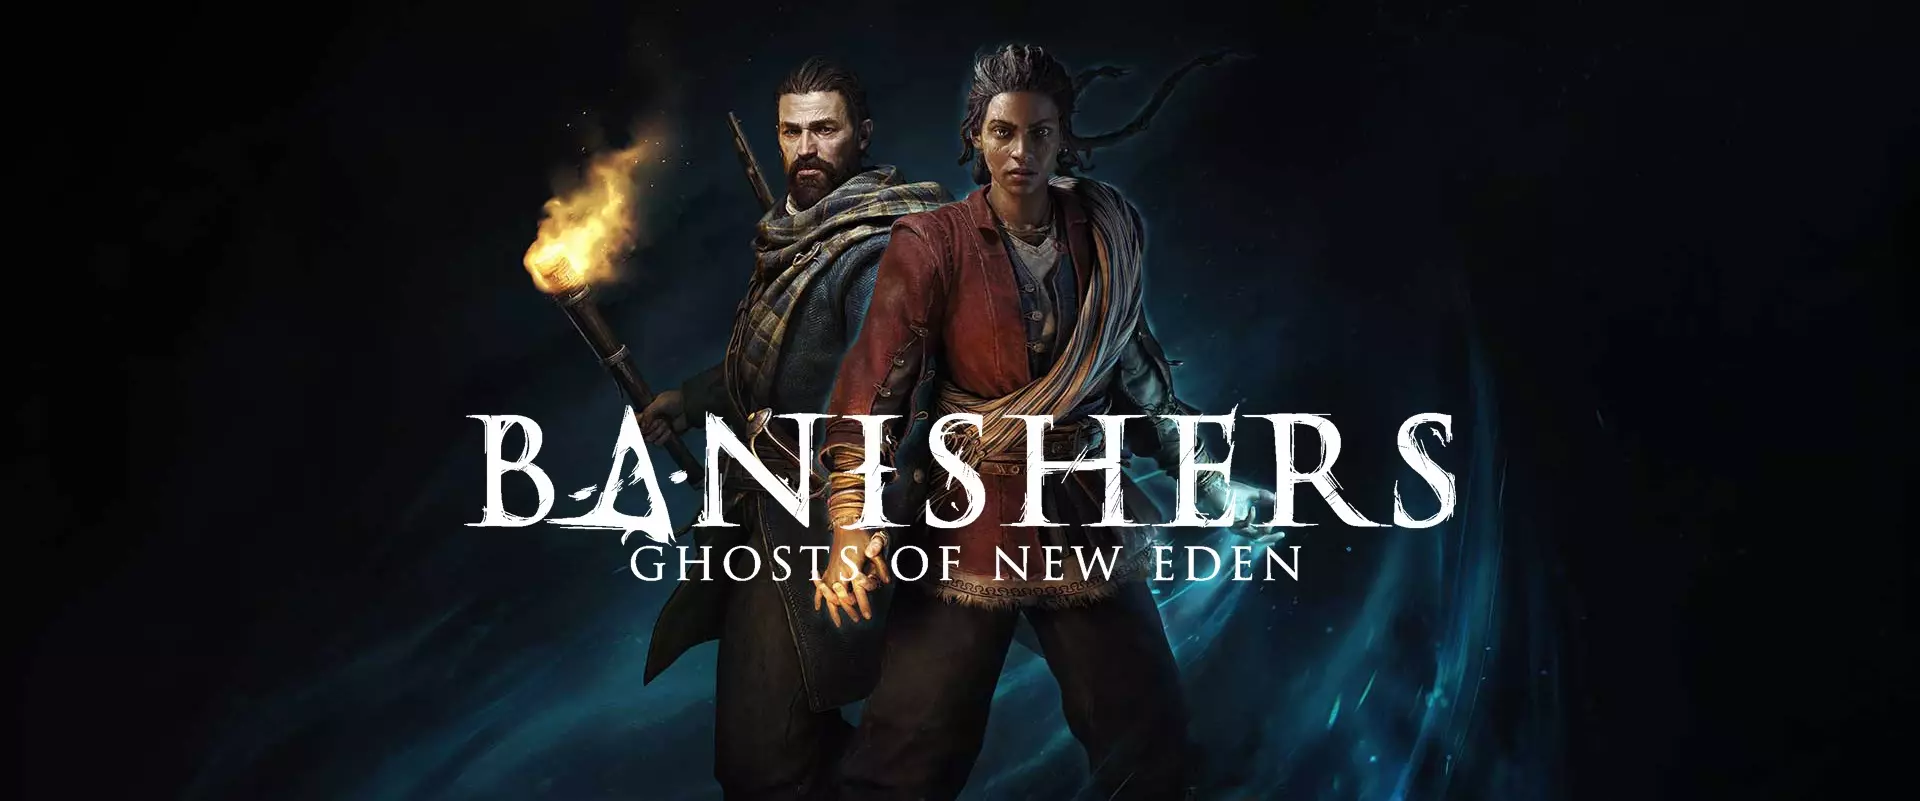 Banishers: Ghosts of New Eden PC Specs & Requirements